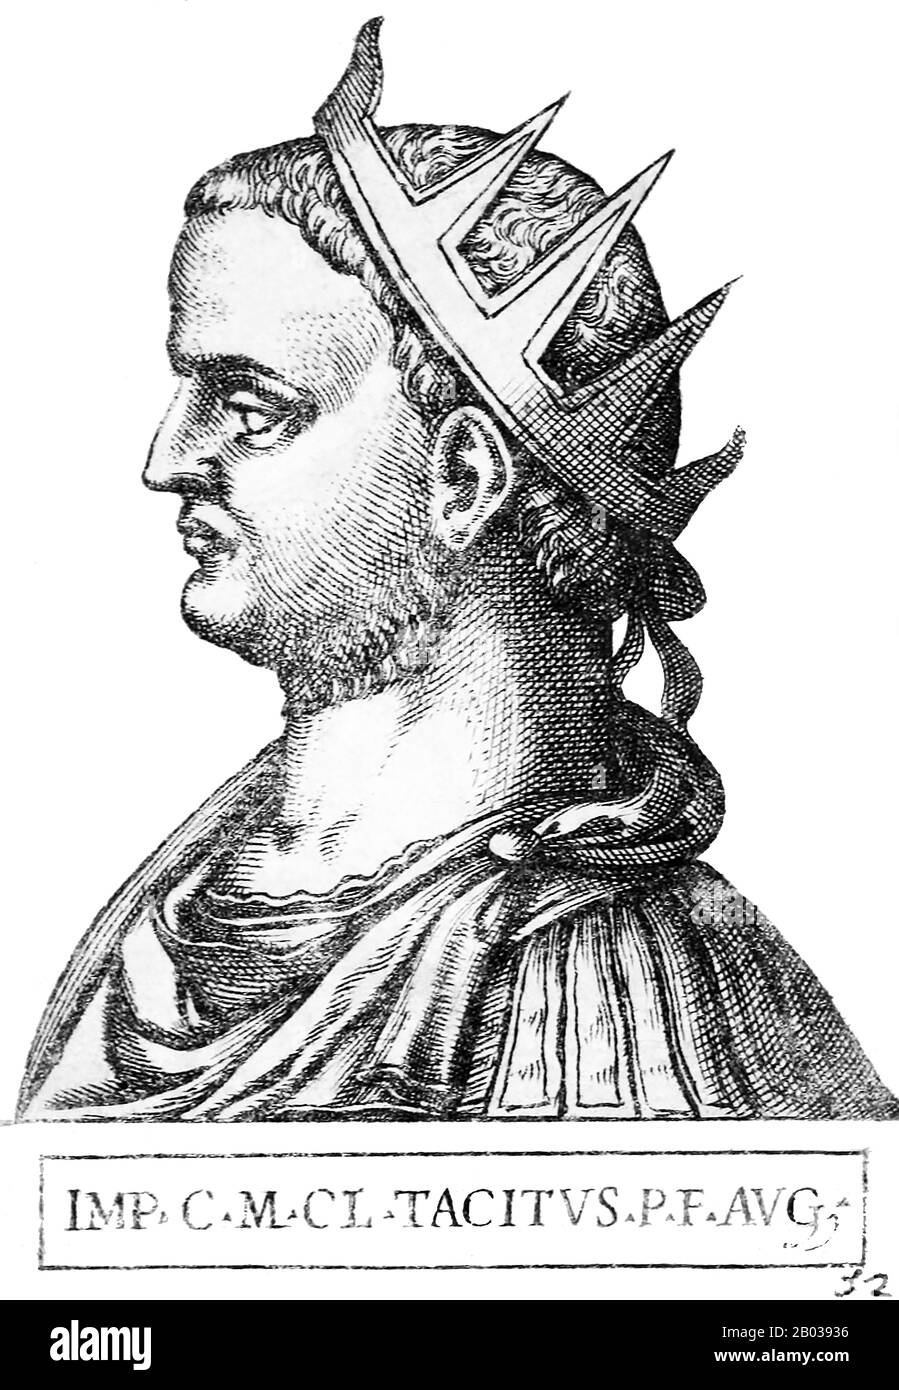 Tacitus (200-276 CE) was born in Interamna (Terni), Italia, and worked for much of his long life in various civil offices, including a term as consul in 273, earning him much universal respect. When Aurelian was assassinated by the Praetorian Guard, Tacitus was chosen as his successor after a brief interregnum by the Roman Senate, the last time the Senate would elect an emperor.  Tacitus' brief reign saw him fight against barbarian mercenaries that had been serving under Aurelian but had broken away to plunder several towns in the Eastern Roman provinces after the previous emperor's death. He Stock Photo